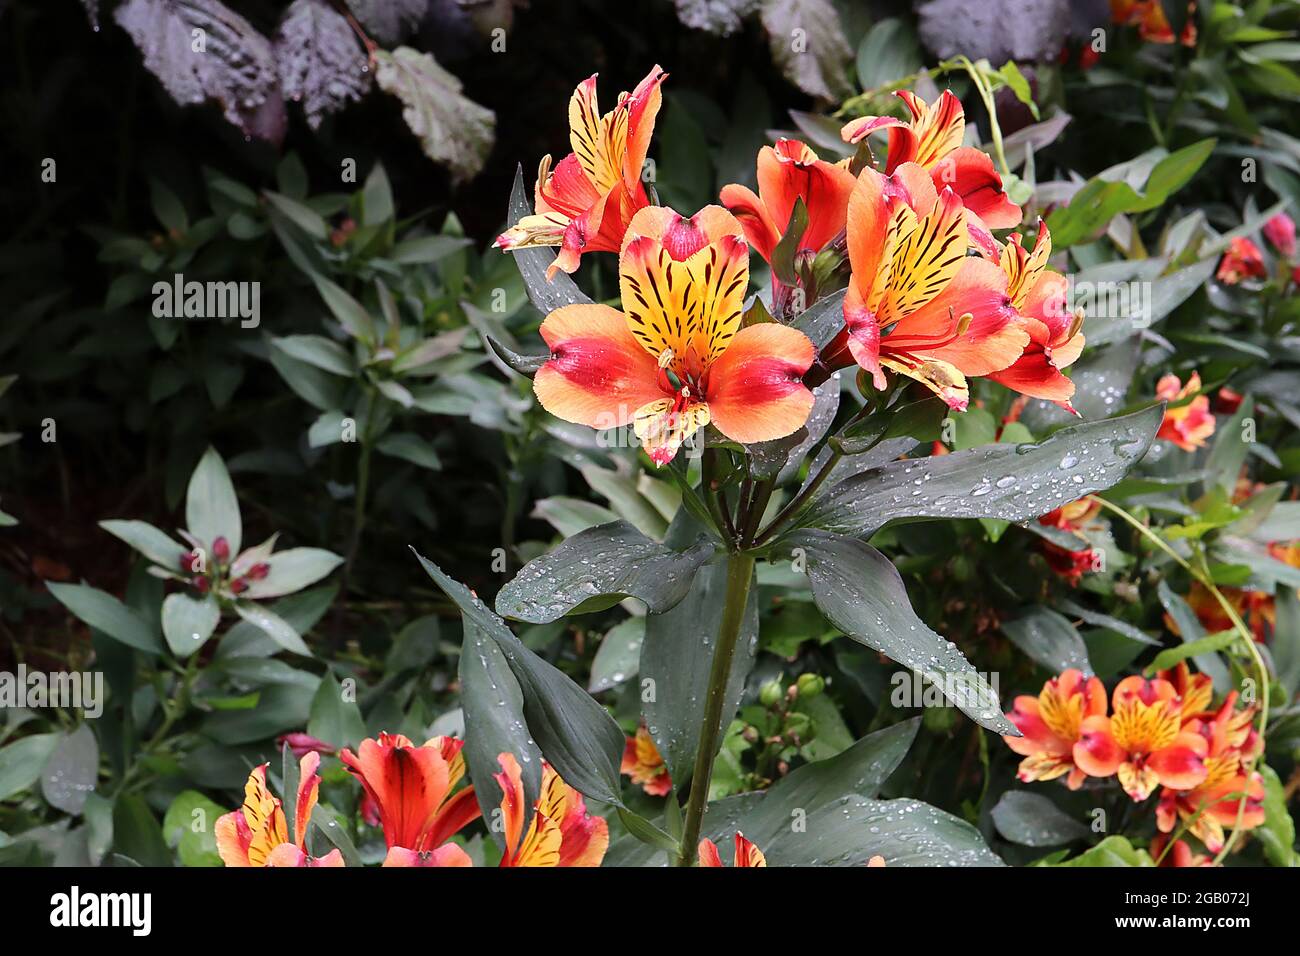 Alstroemeria ‘Indian Summer’ Peruvian lily Indian Summer – orange funnel-shaped flowers with yellow wash, deep pink stripes and brown flecks,  June,UK Stock Photo